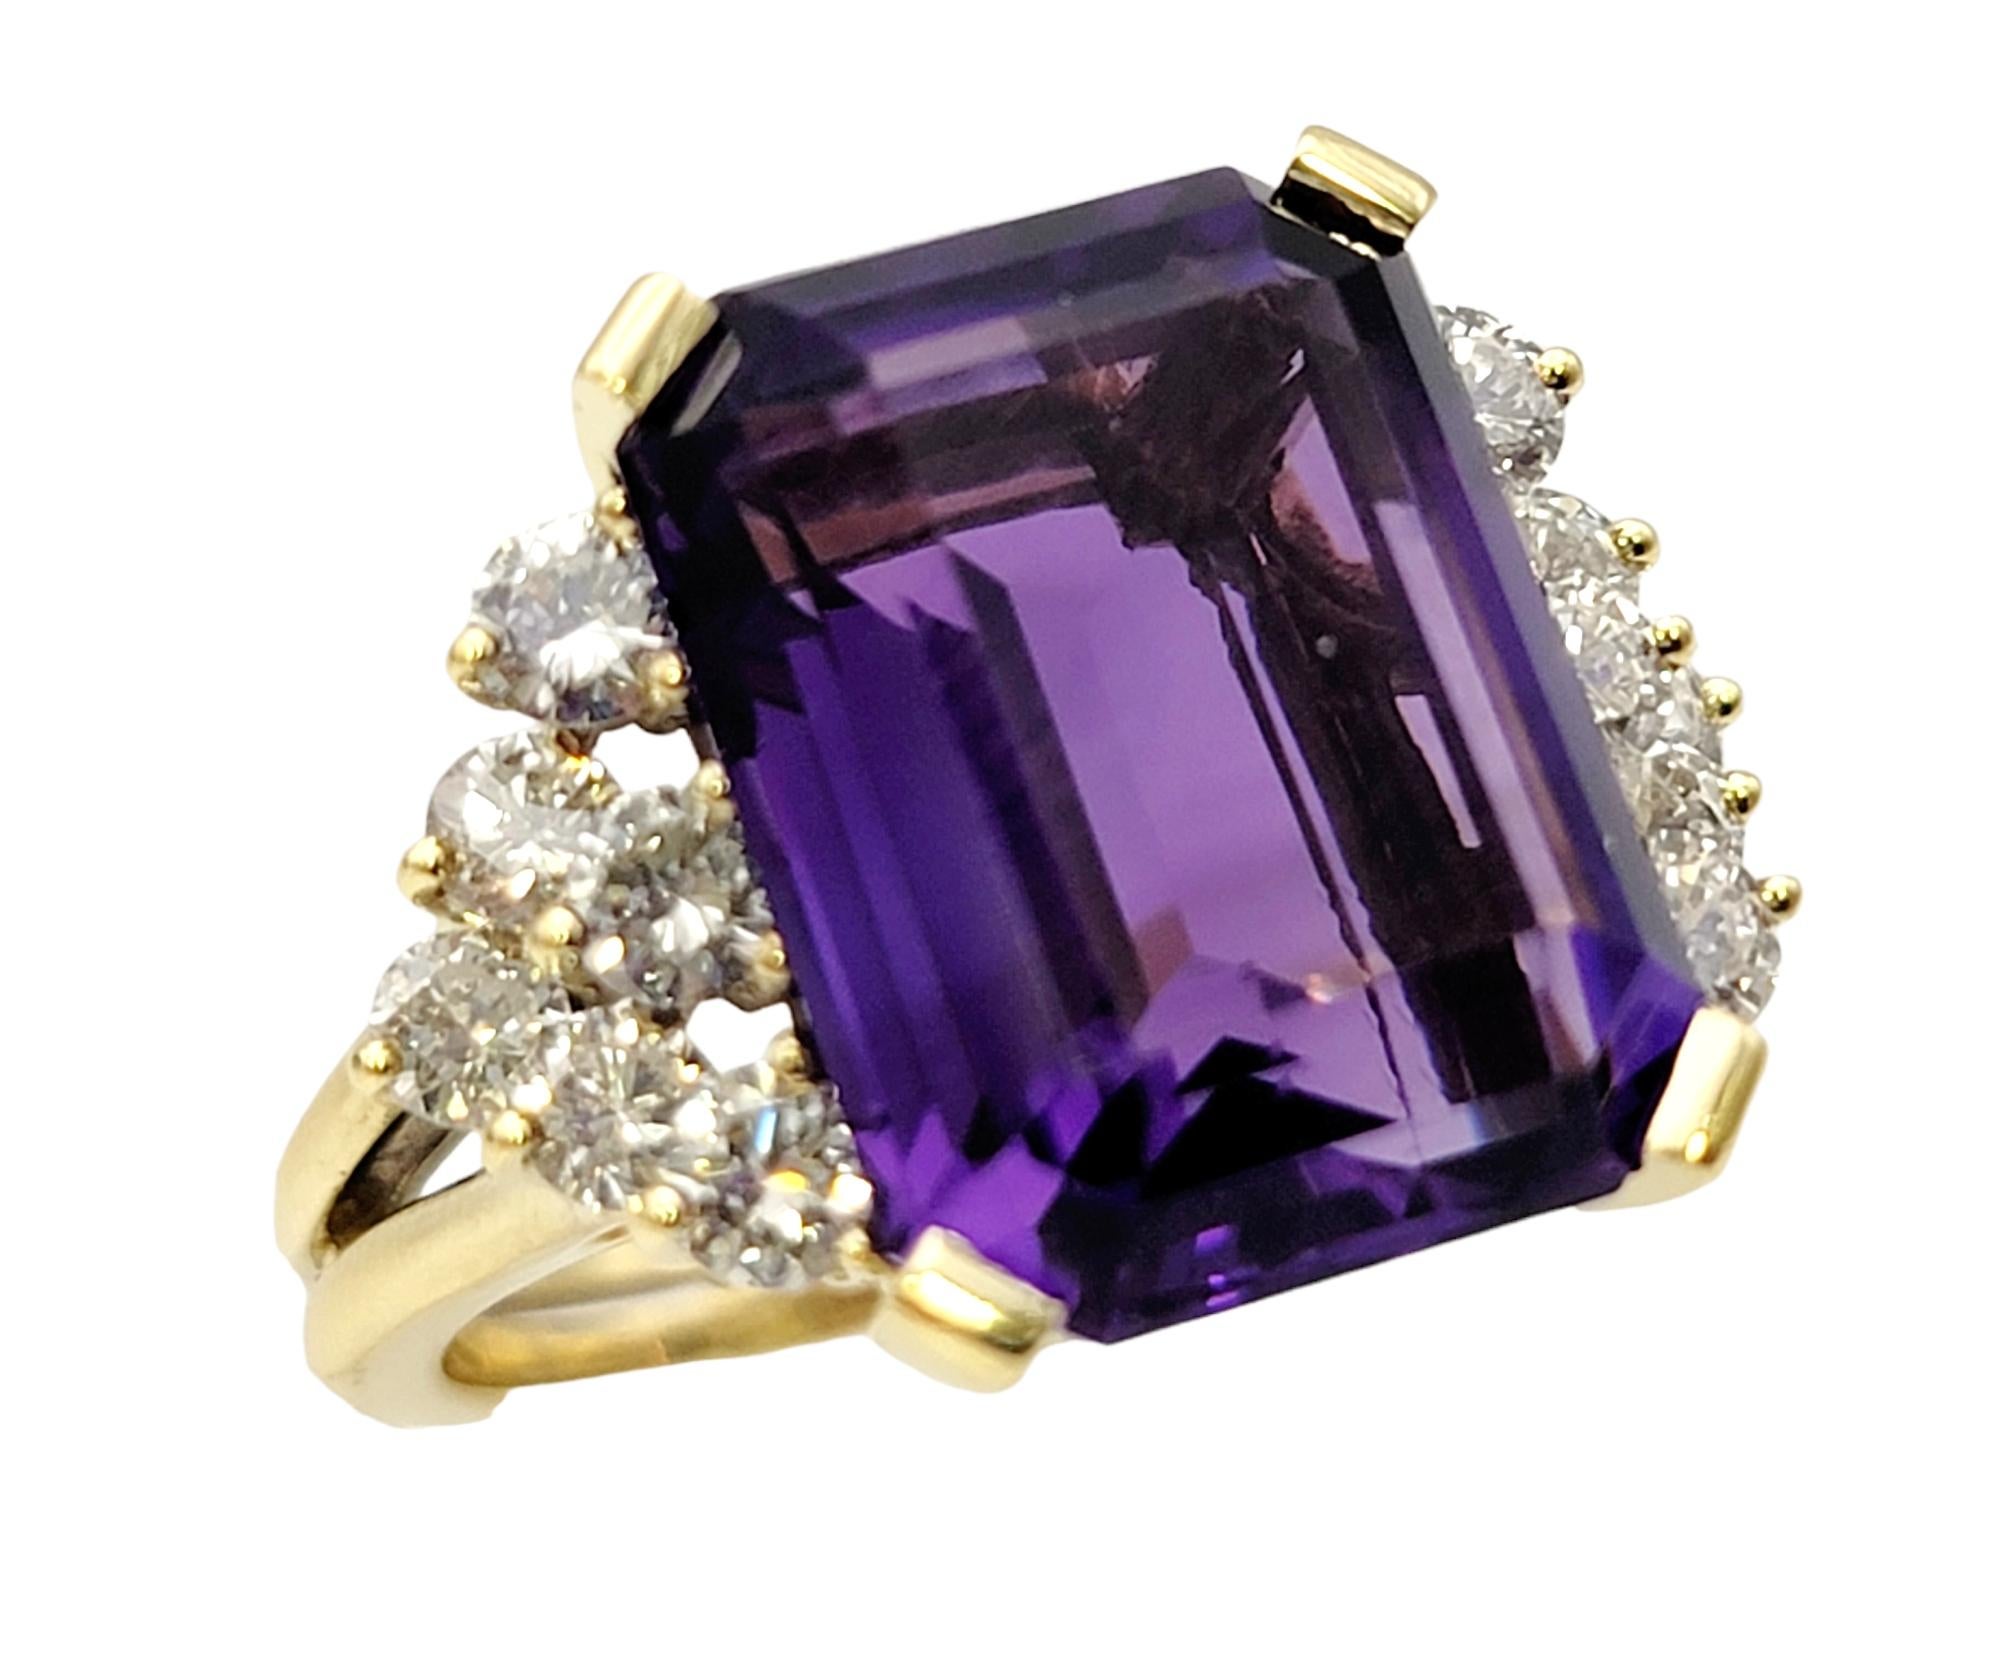 Ring size: 6.75

Breathtaking amethyst and diamond ring. The vibrant purple hue of the emerald cut amethyst pops against the icy white diamonds on either side, while the split yellow gold shank adds a unique detail to the piece. The elongated stone